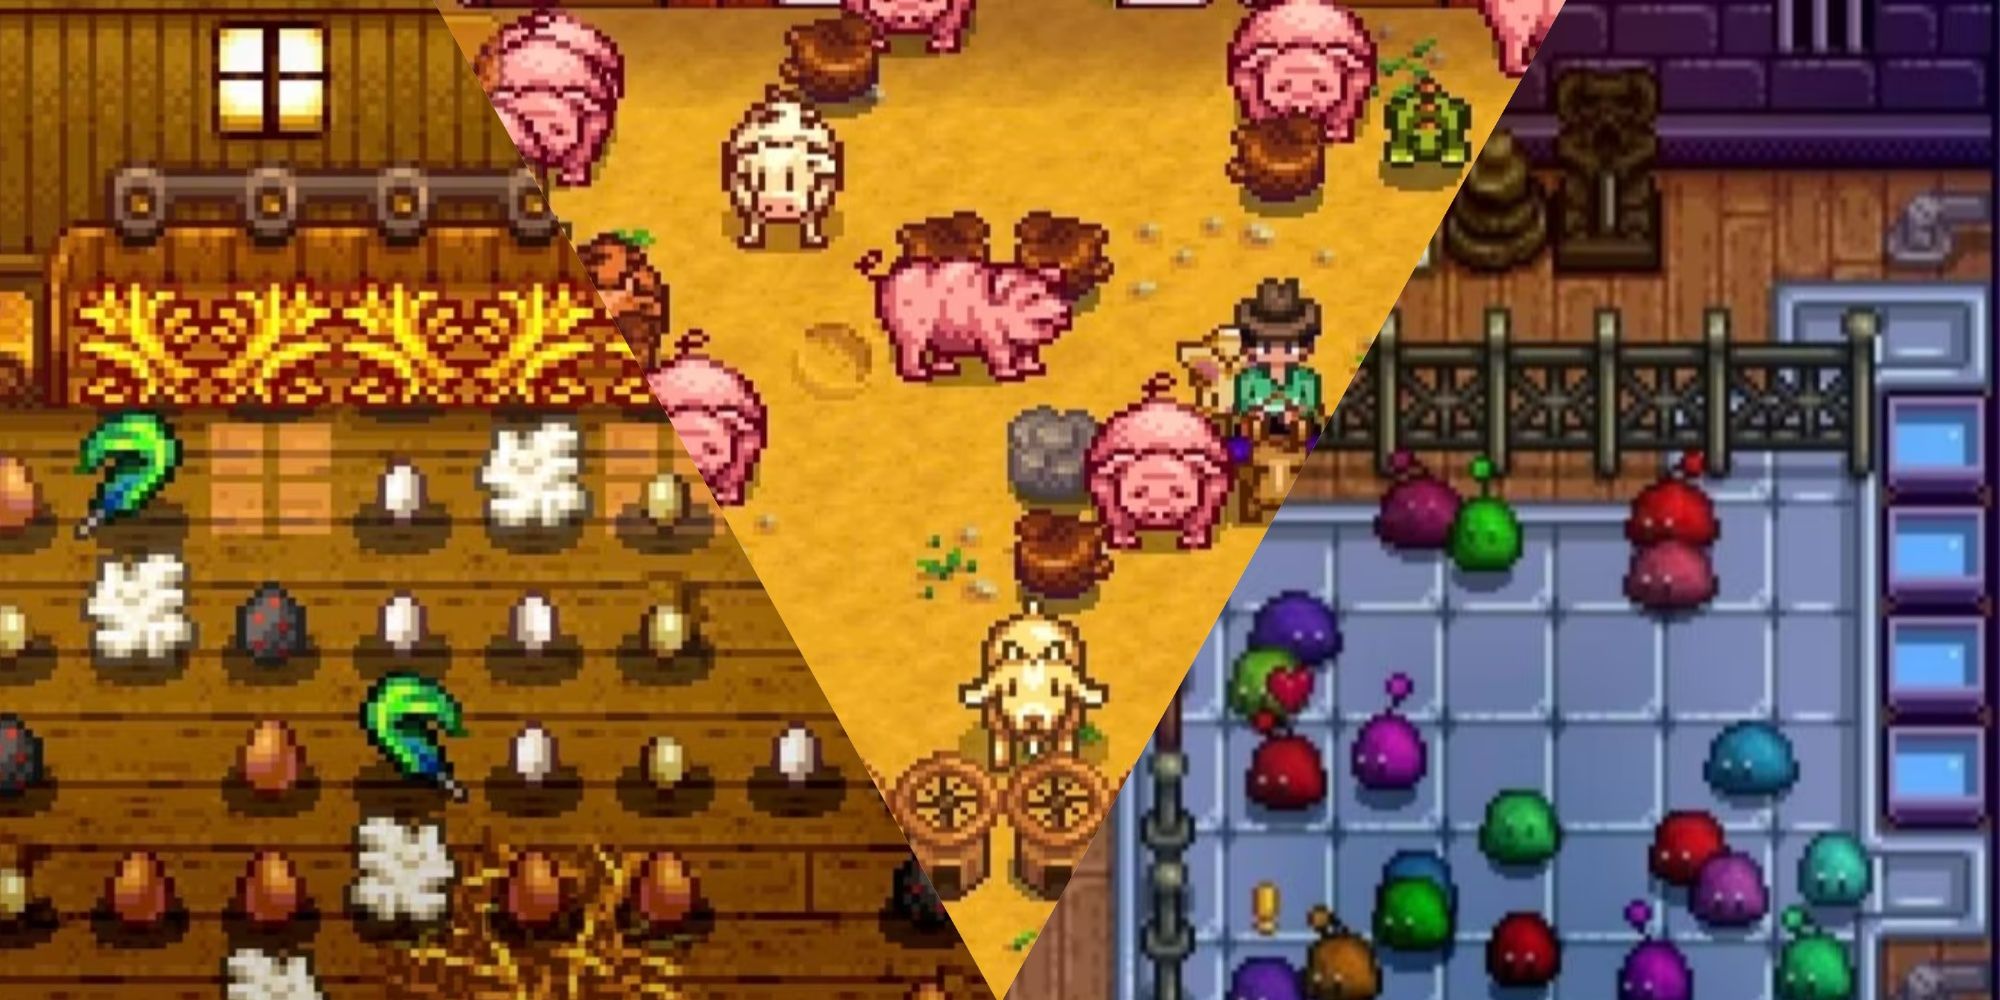 Three images of Stardew Valley showing animal products